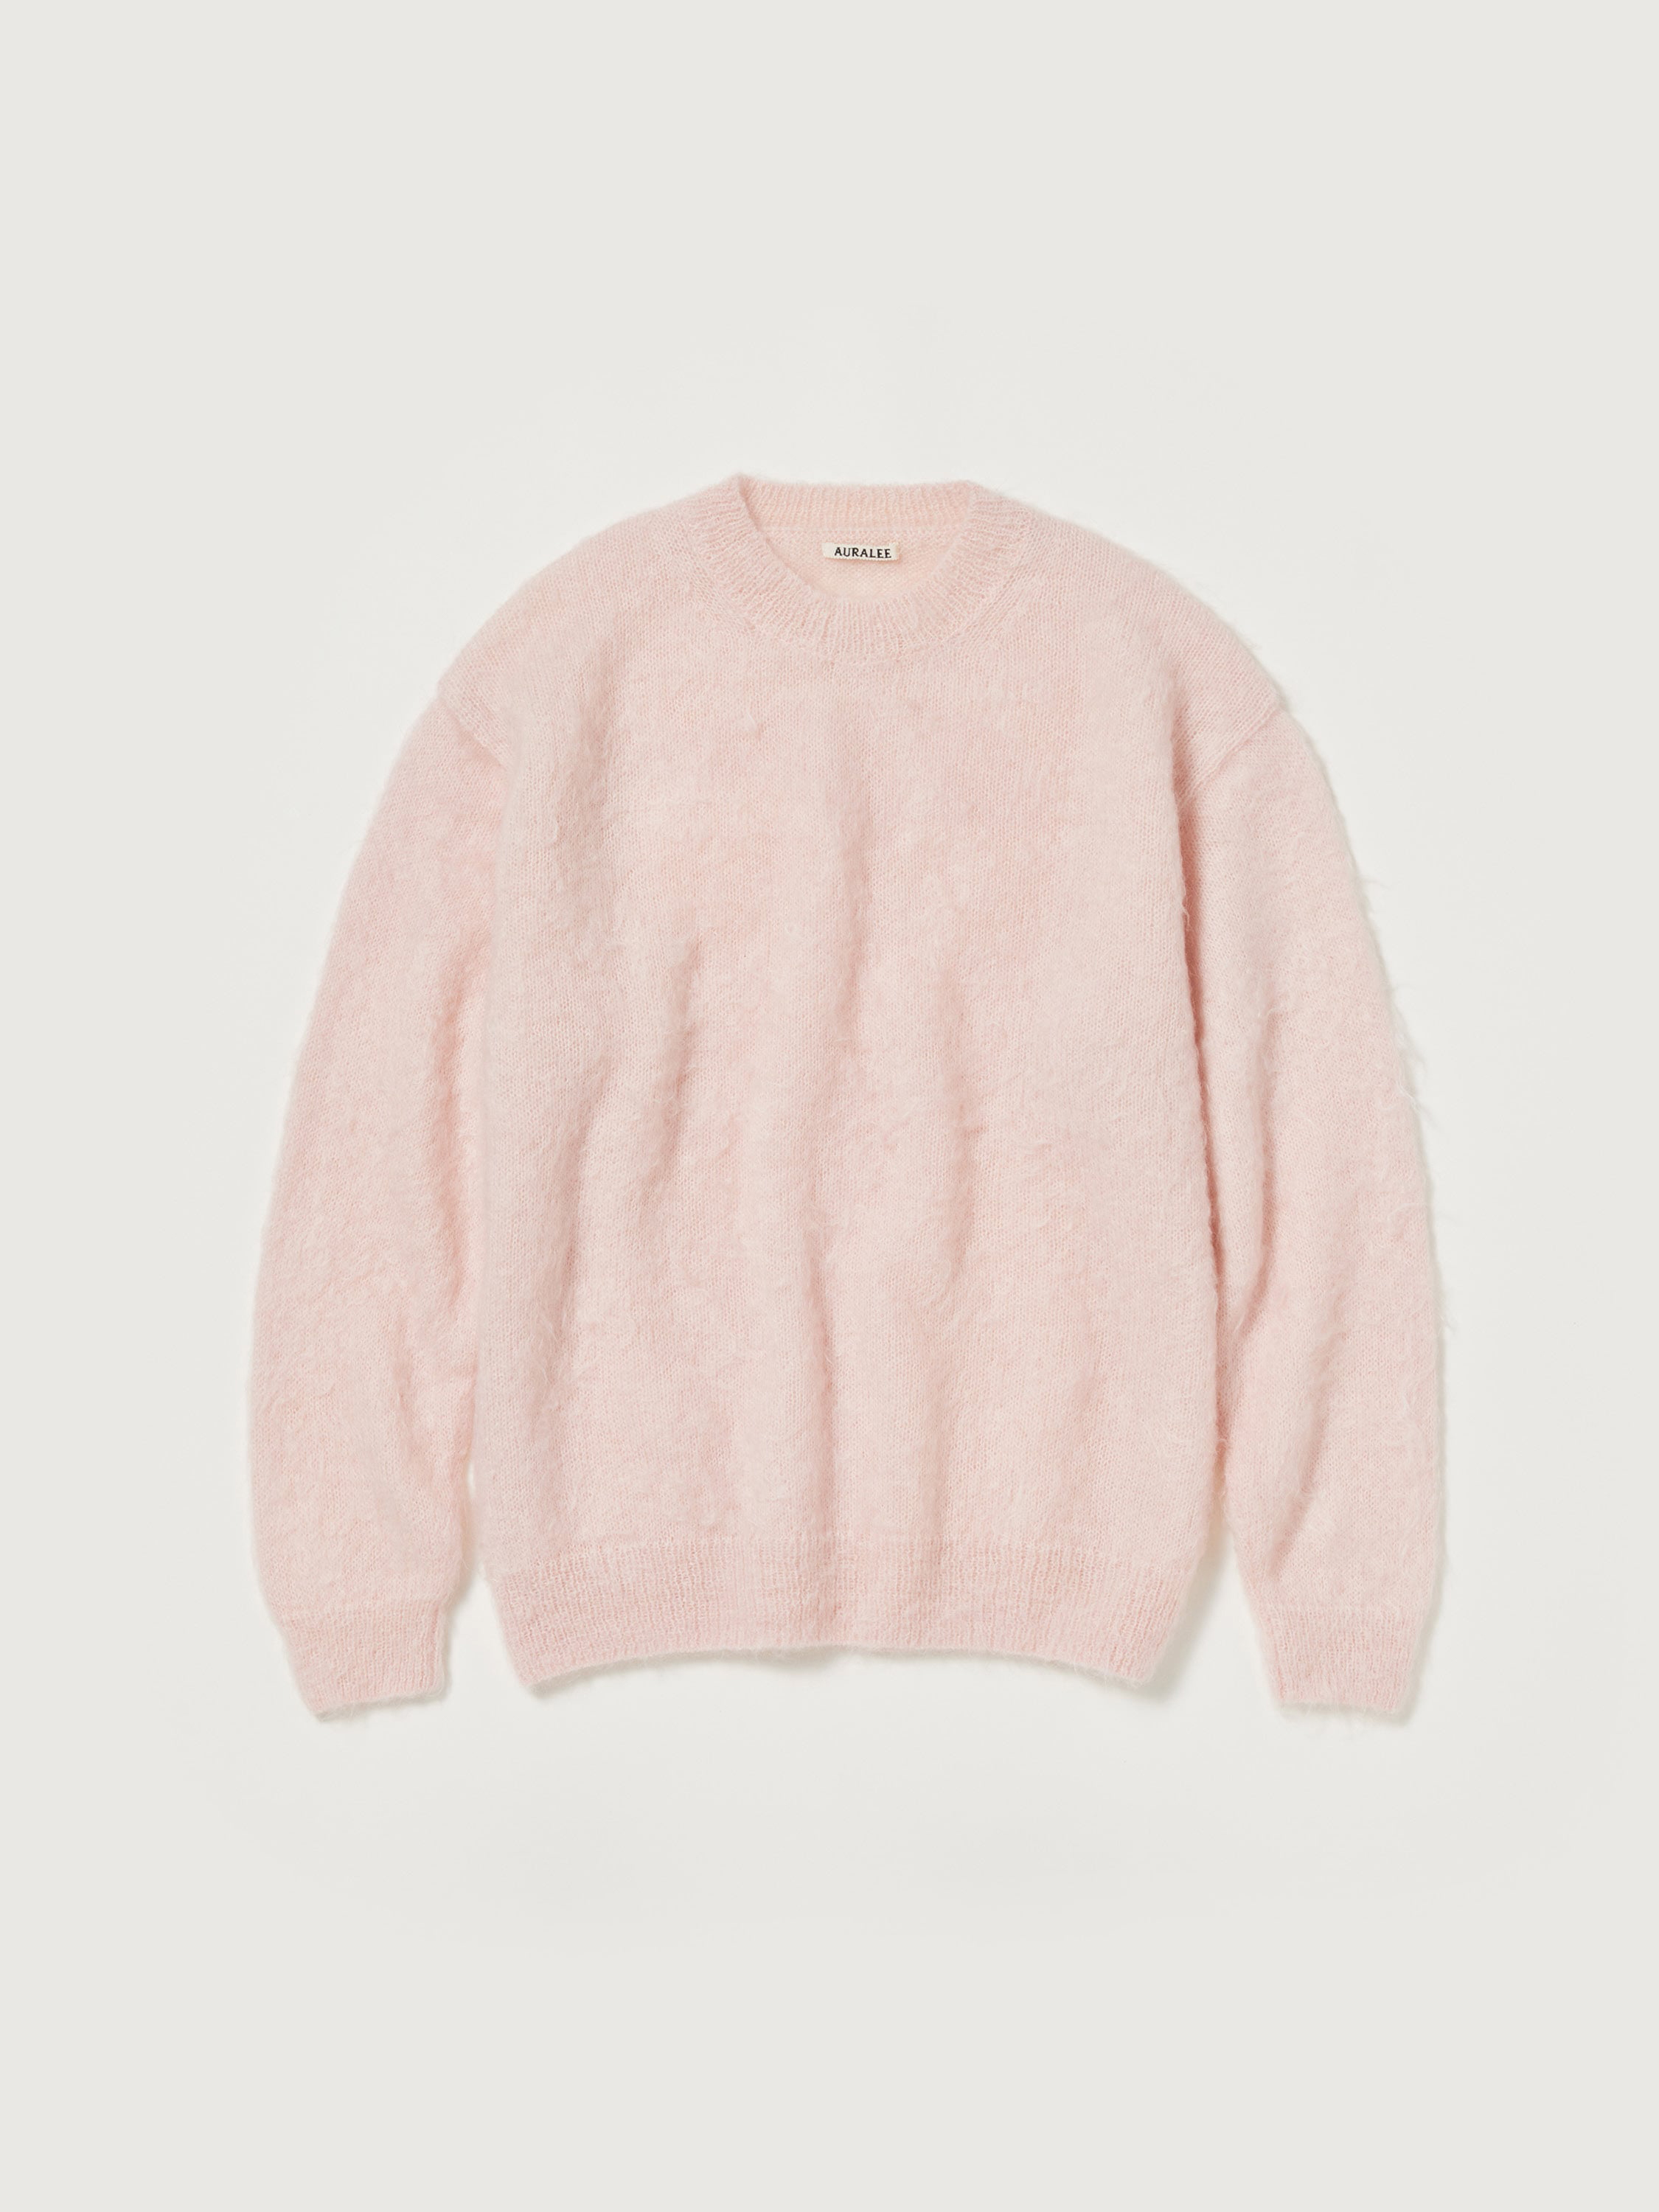 BRUSHED SUPER KID MOHAIR KNIT P/O 詳細画像 LIGHT PINK 1